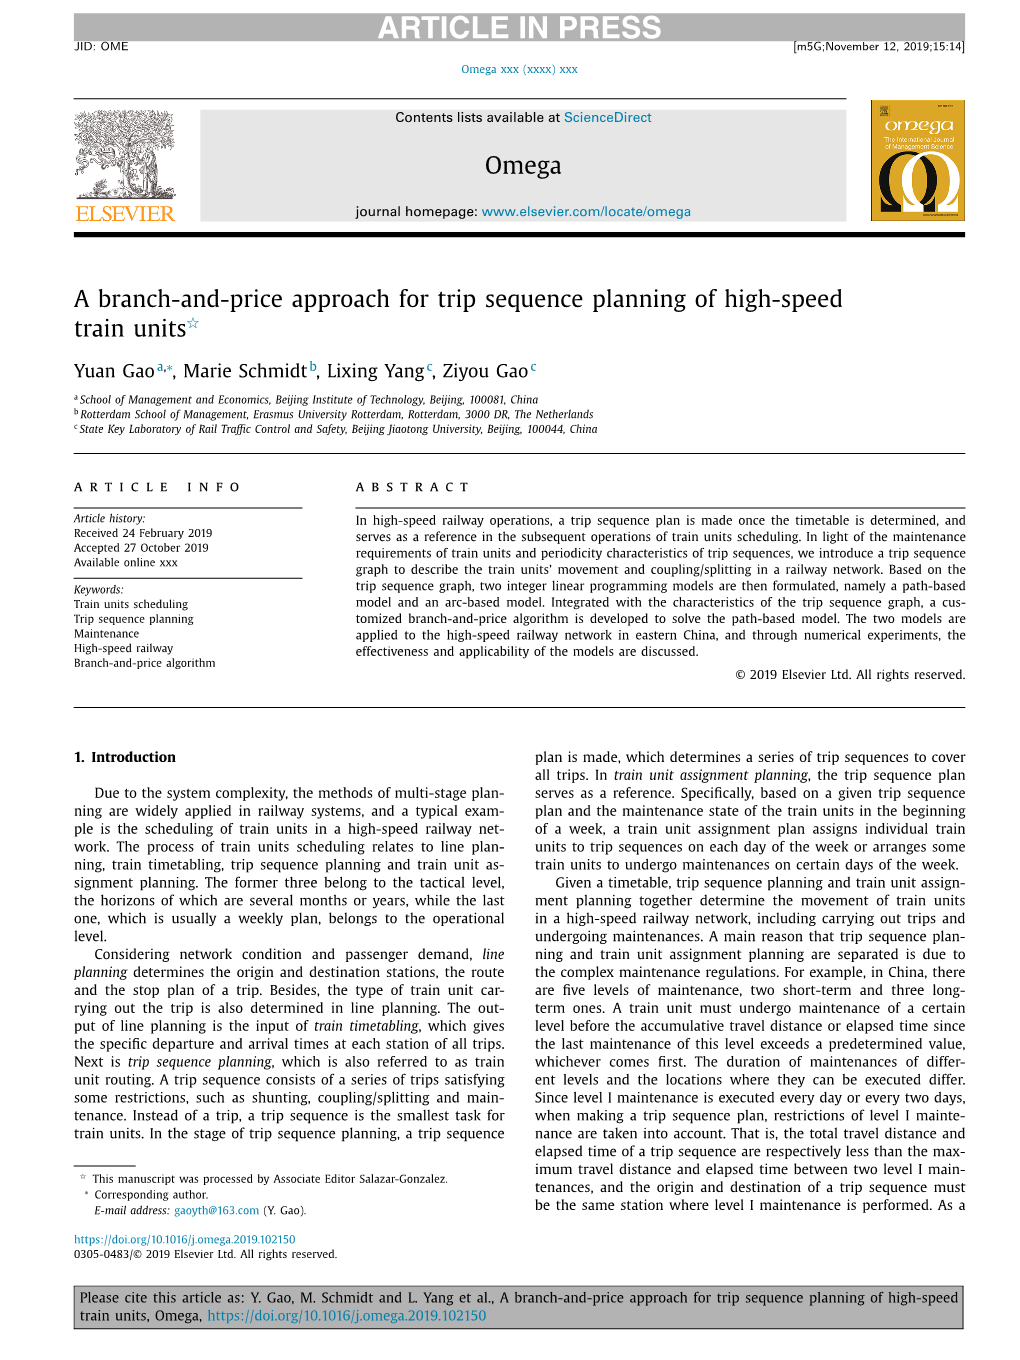 A Branch-And-Price Approach for Trip Sequence Planning of High-Speed R Train Units